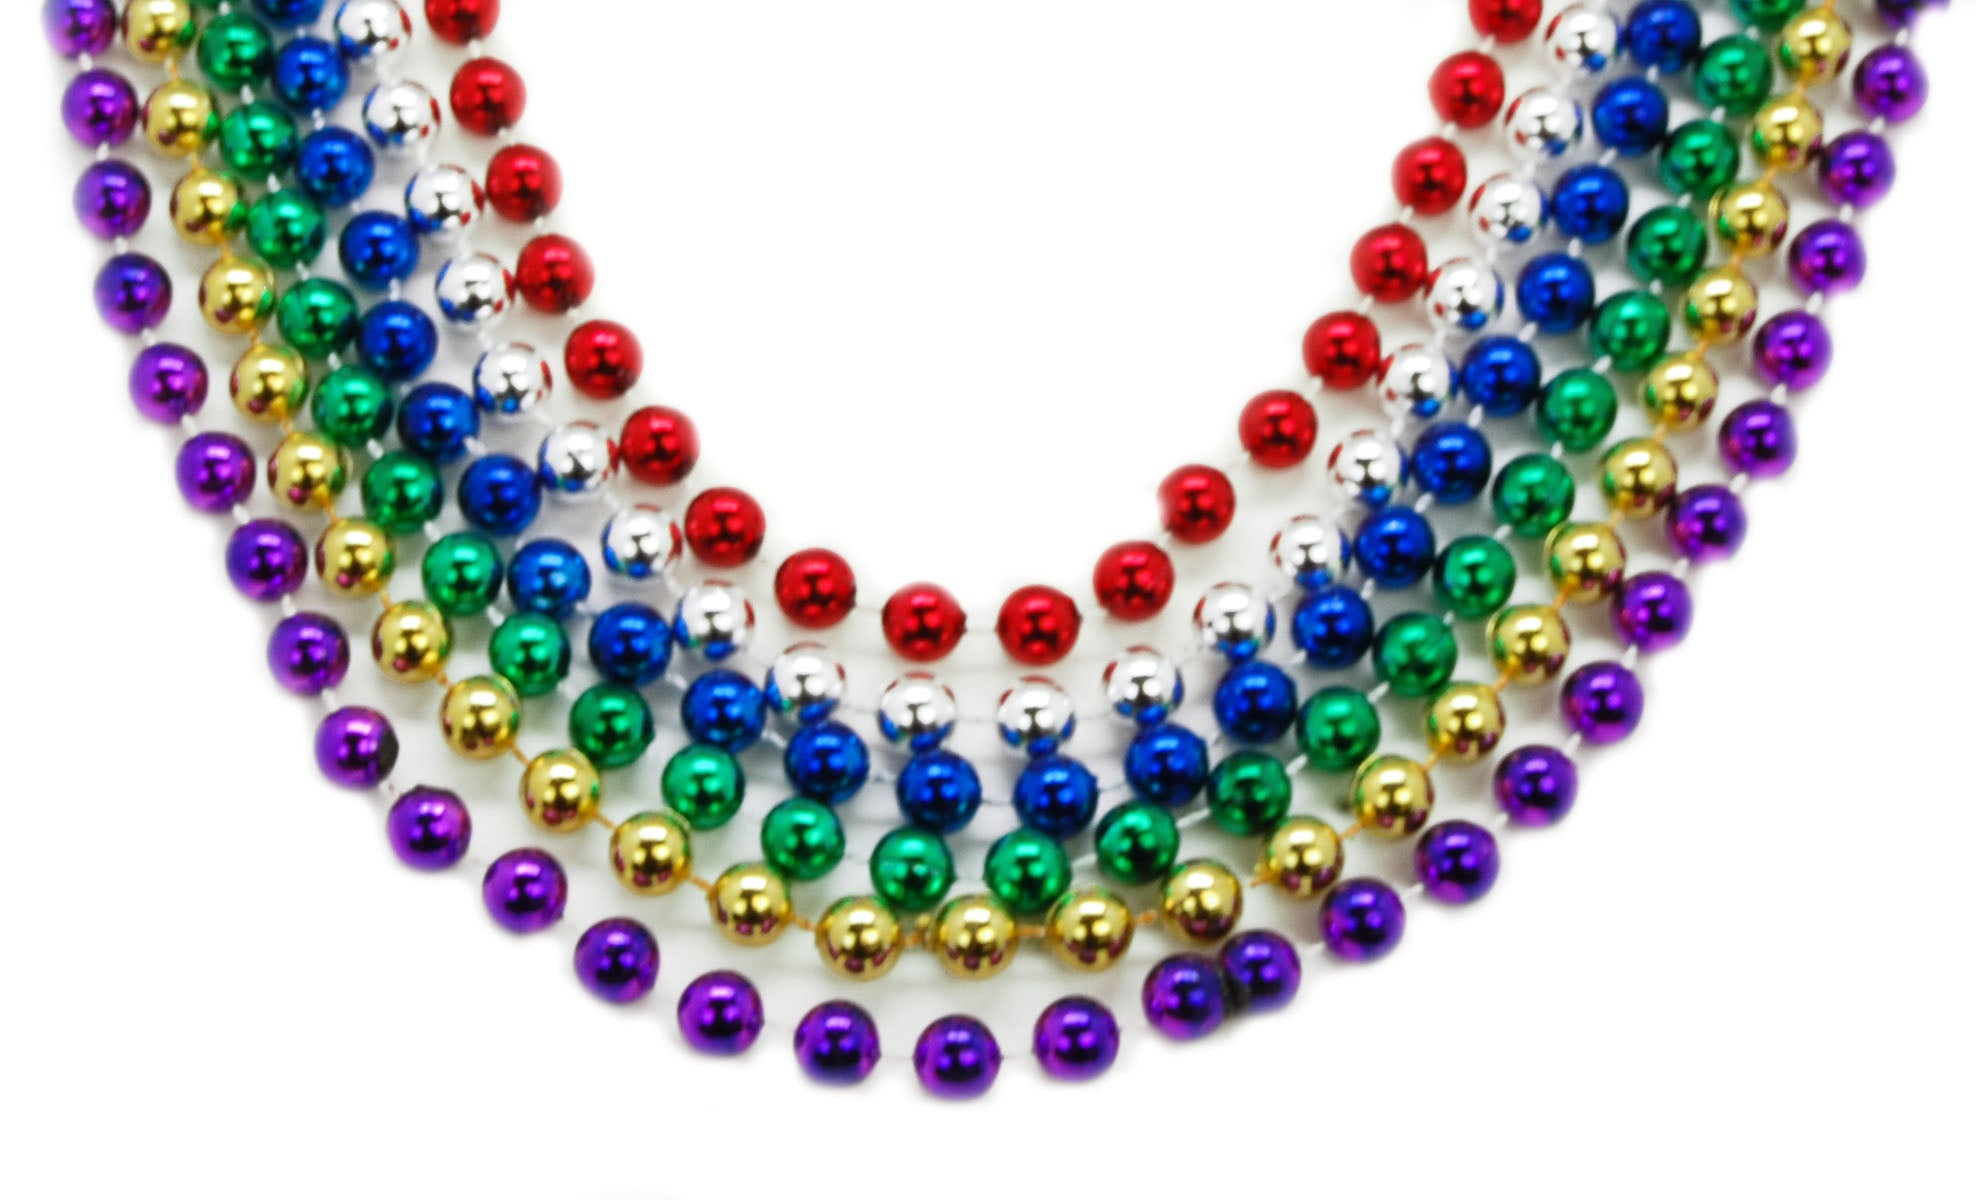 12 Wholesale Party Beads - Small Round - at 